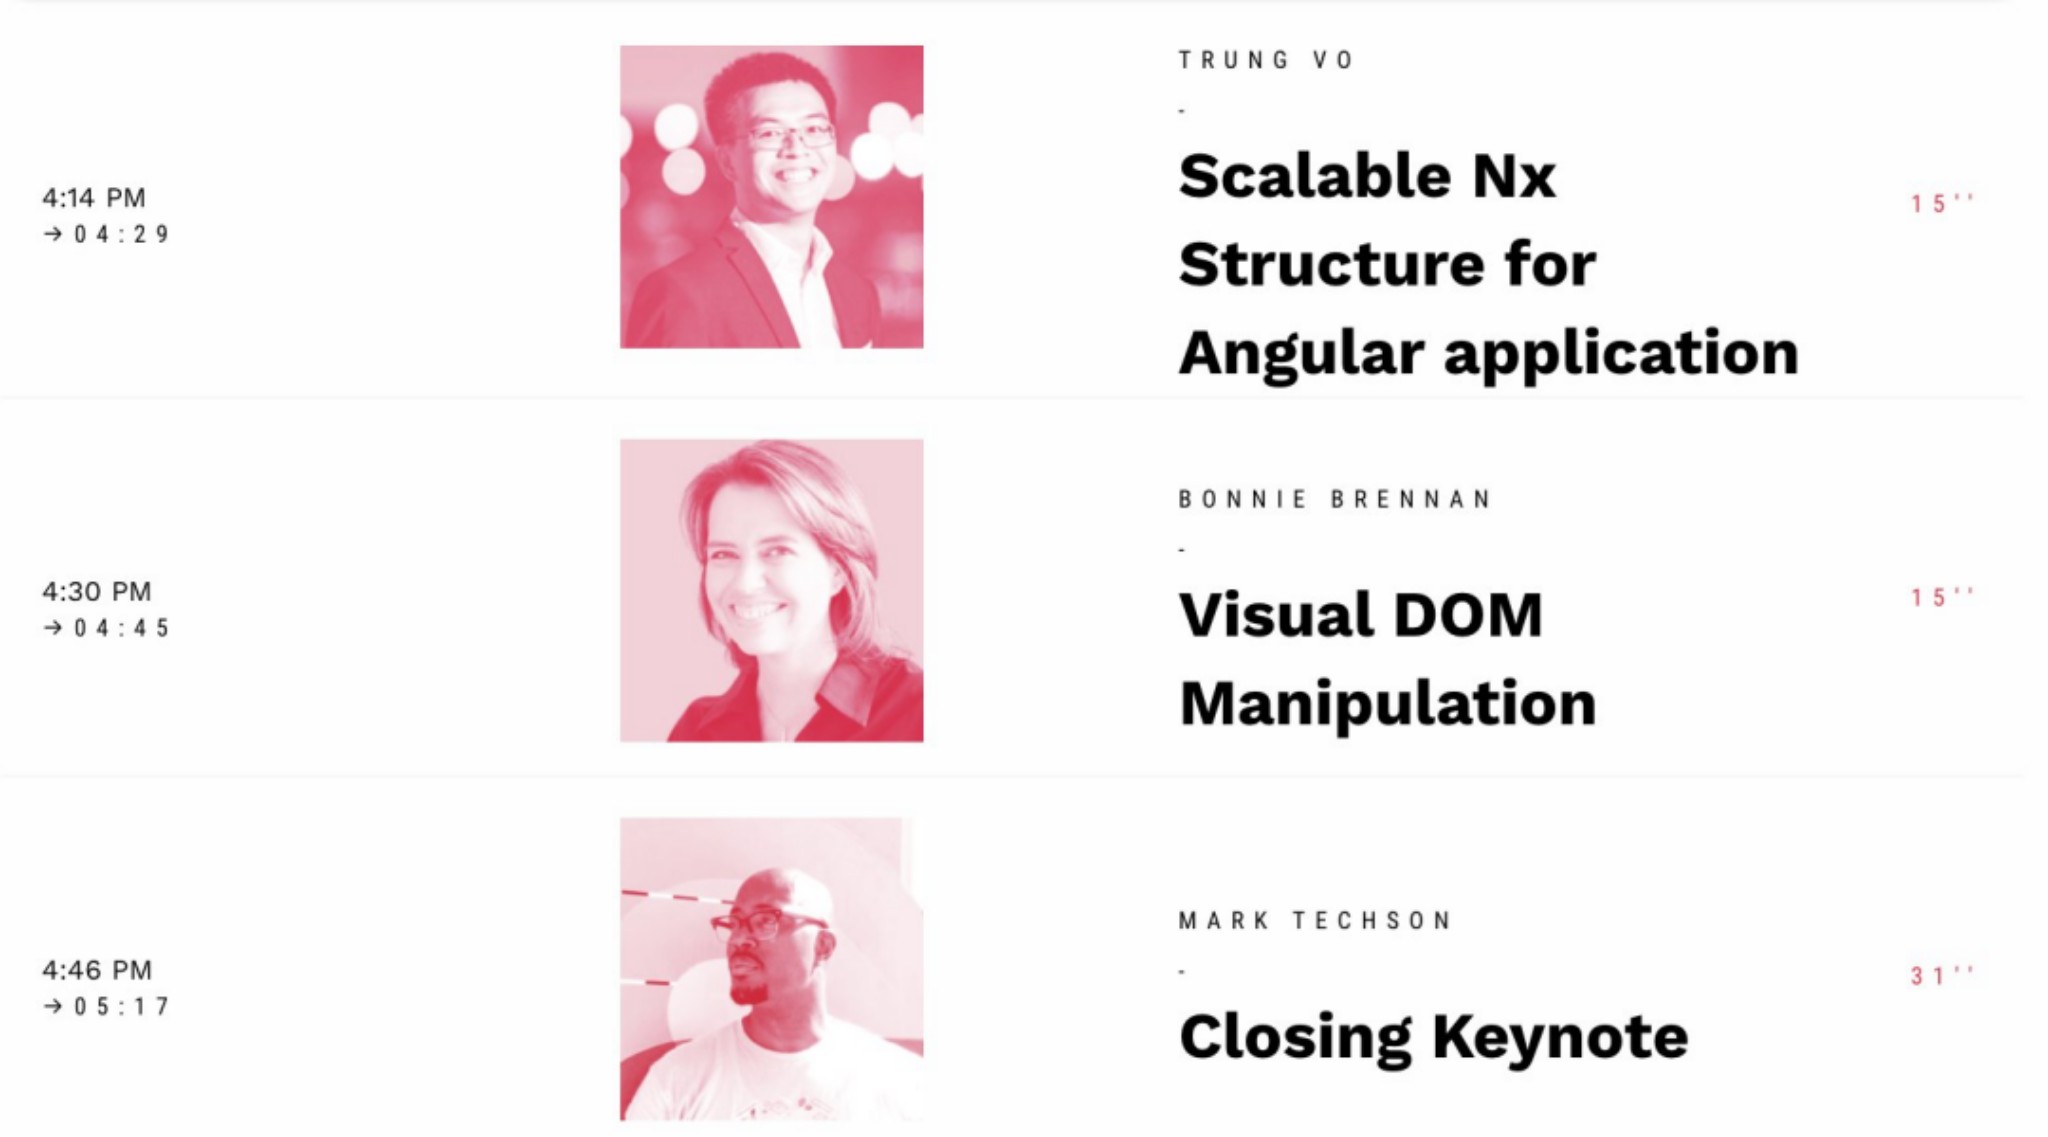 Scalable Nx Structure for Angular application